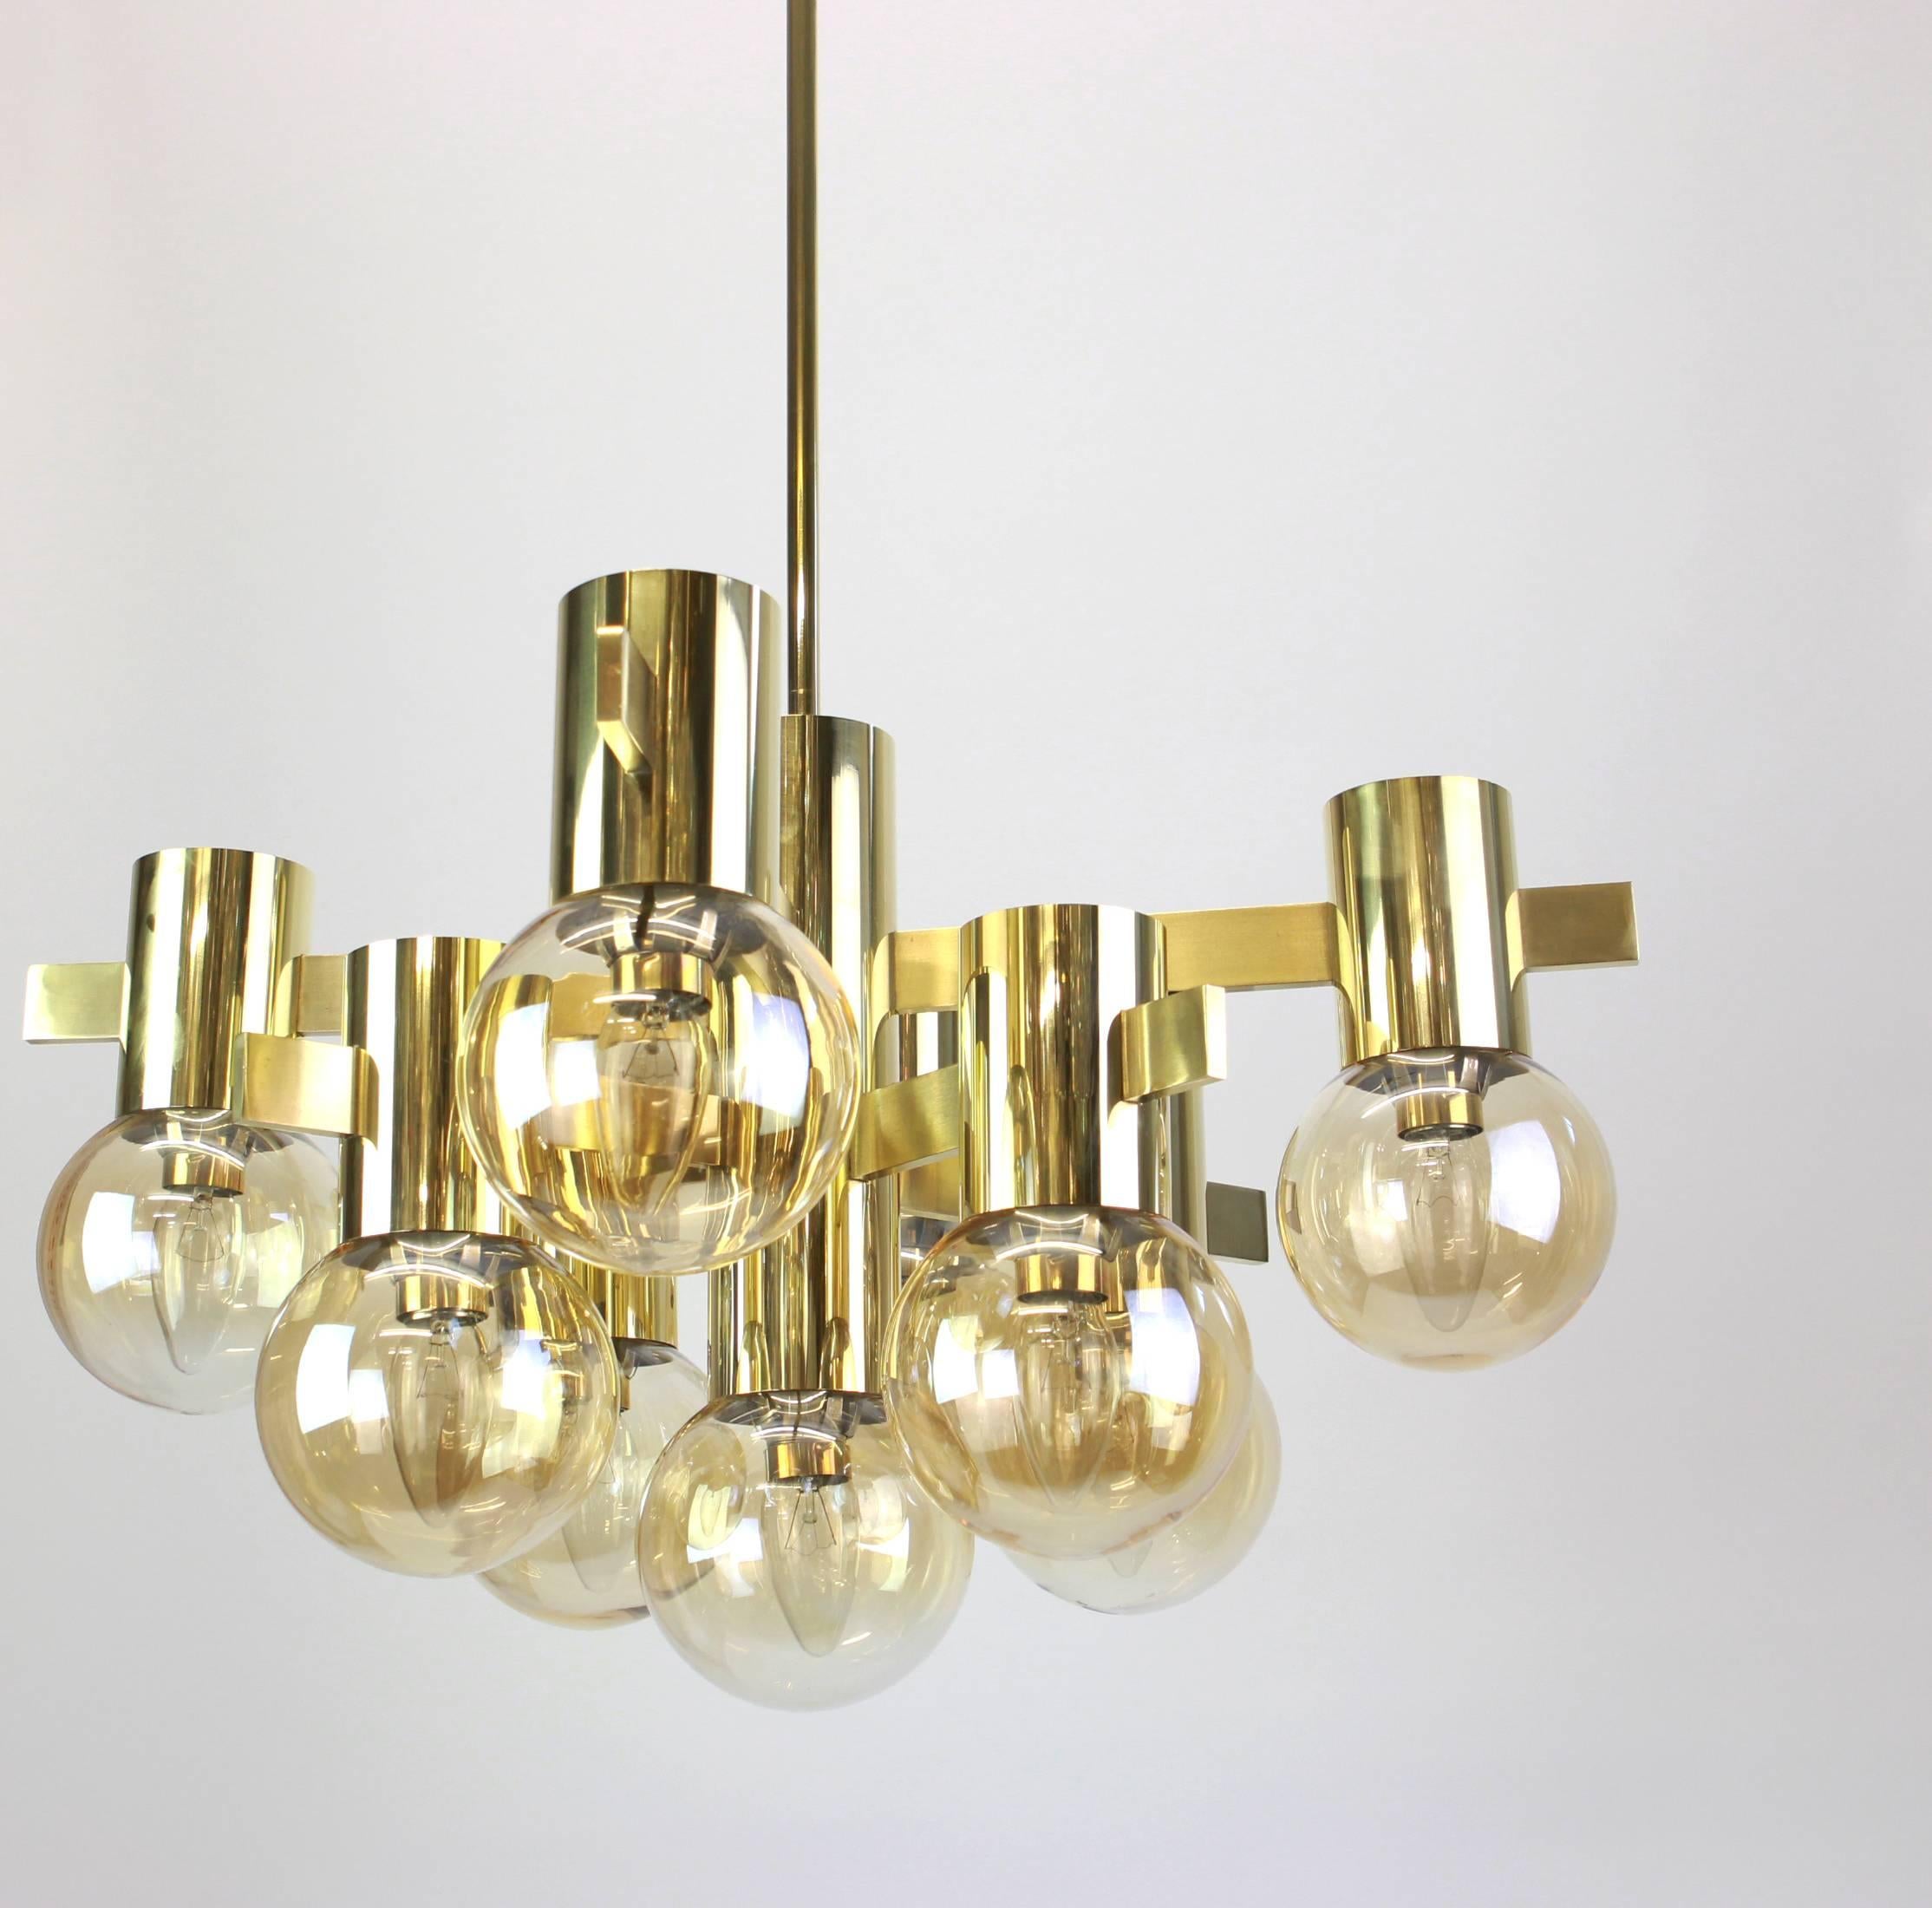 Nine-light brass chandelier in the style of Sciolari.
Smoked glass in a very beautiful smokey brown color.
Made with brass, best of the 1960s.

High quality and in very good condition. Cleaned, well-wired and ready to use. 

The fixture requires 9 x